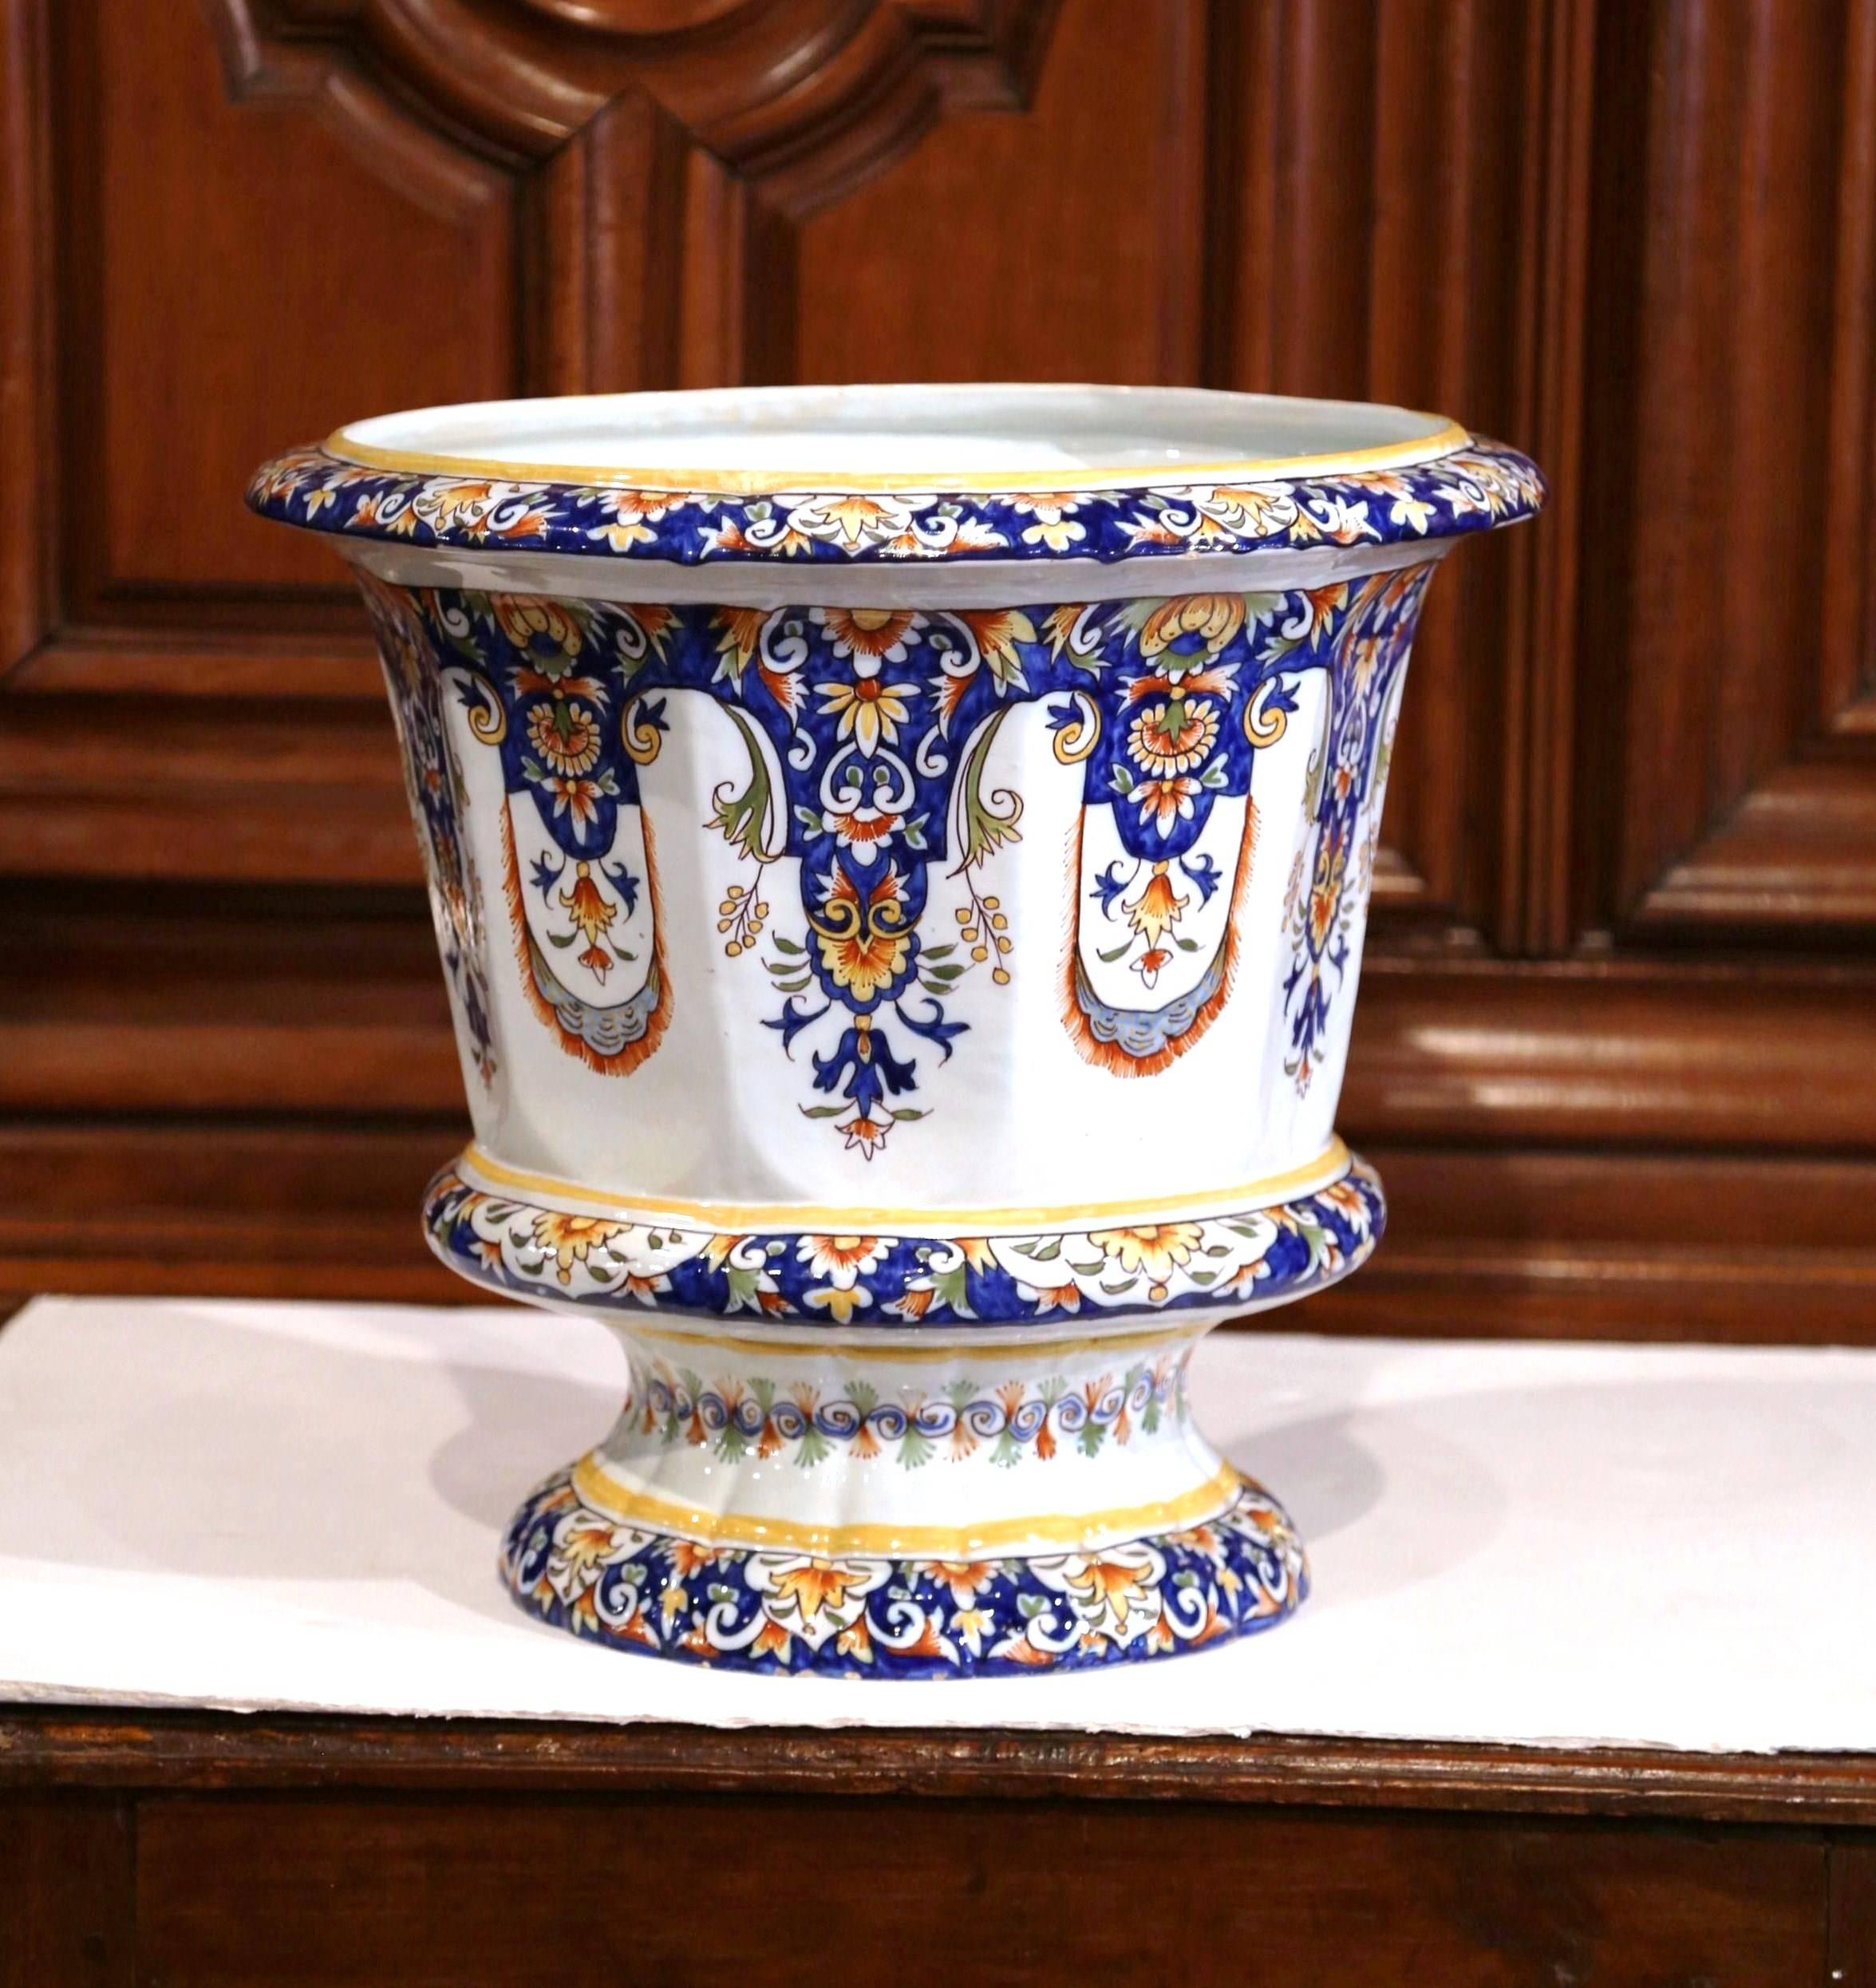 Ceramic Early 20th Century, French Hand Painted Faience Planter from Normandy